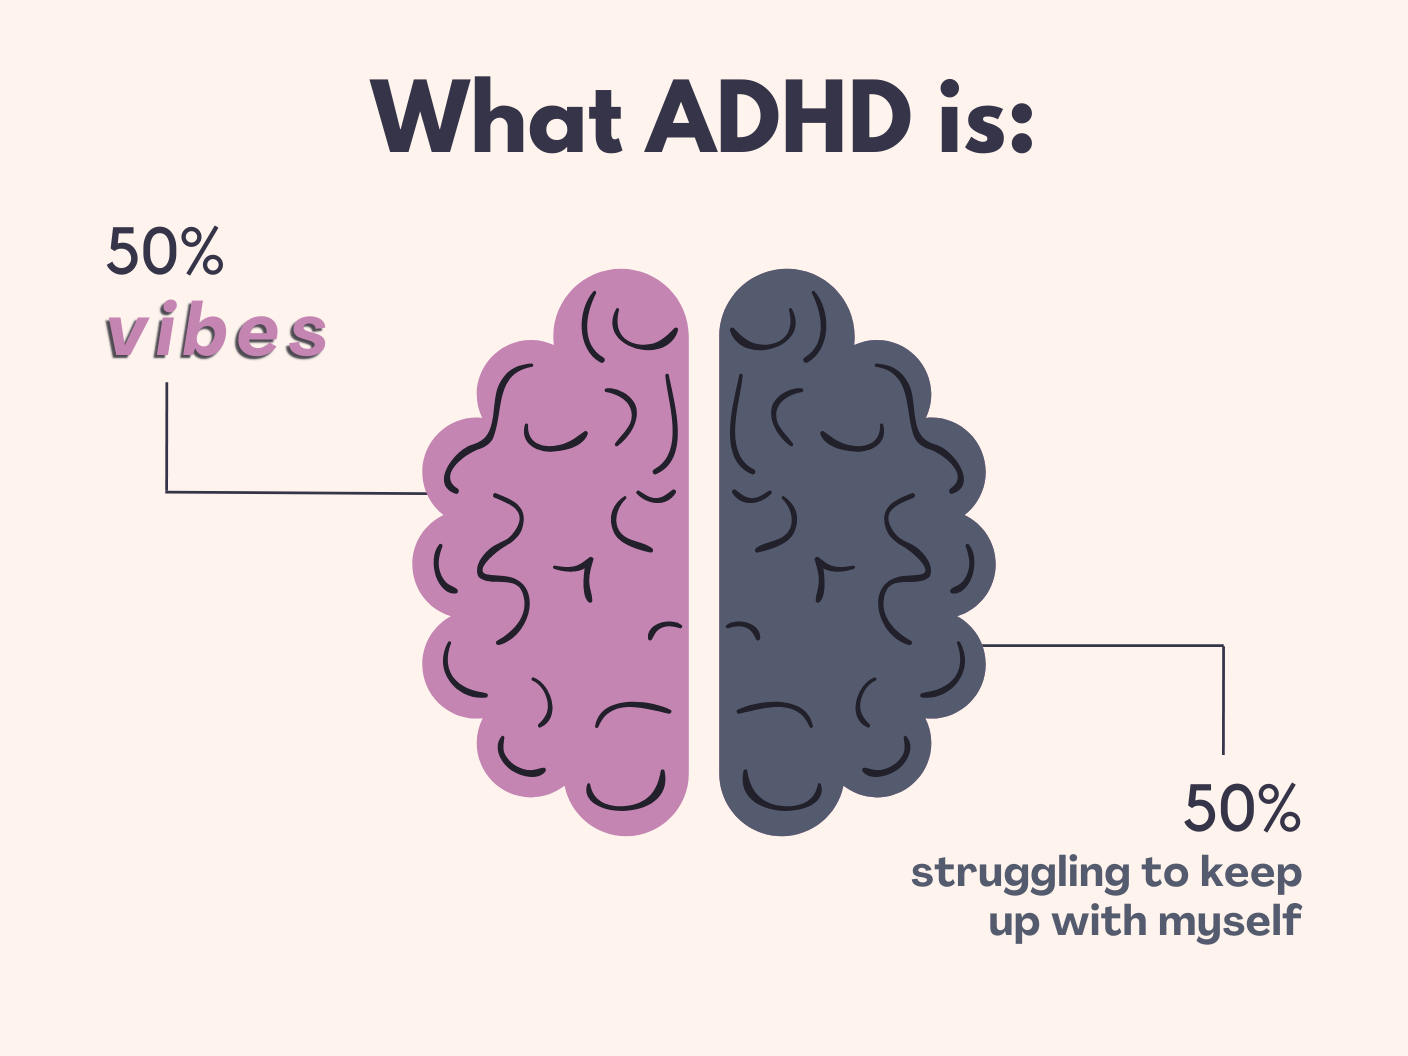 Title: what adhd is. Image shows a brain halved in two. One half is labeled: 50% vibes. The other half is labeled: 50% struggling to keep up with myself